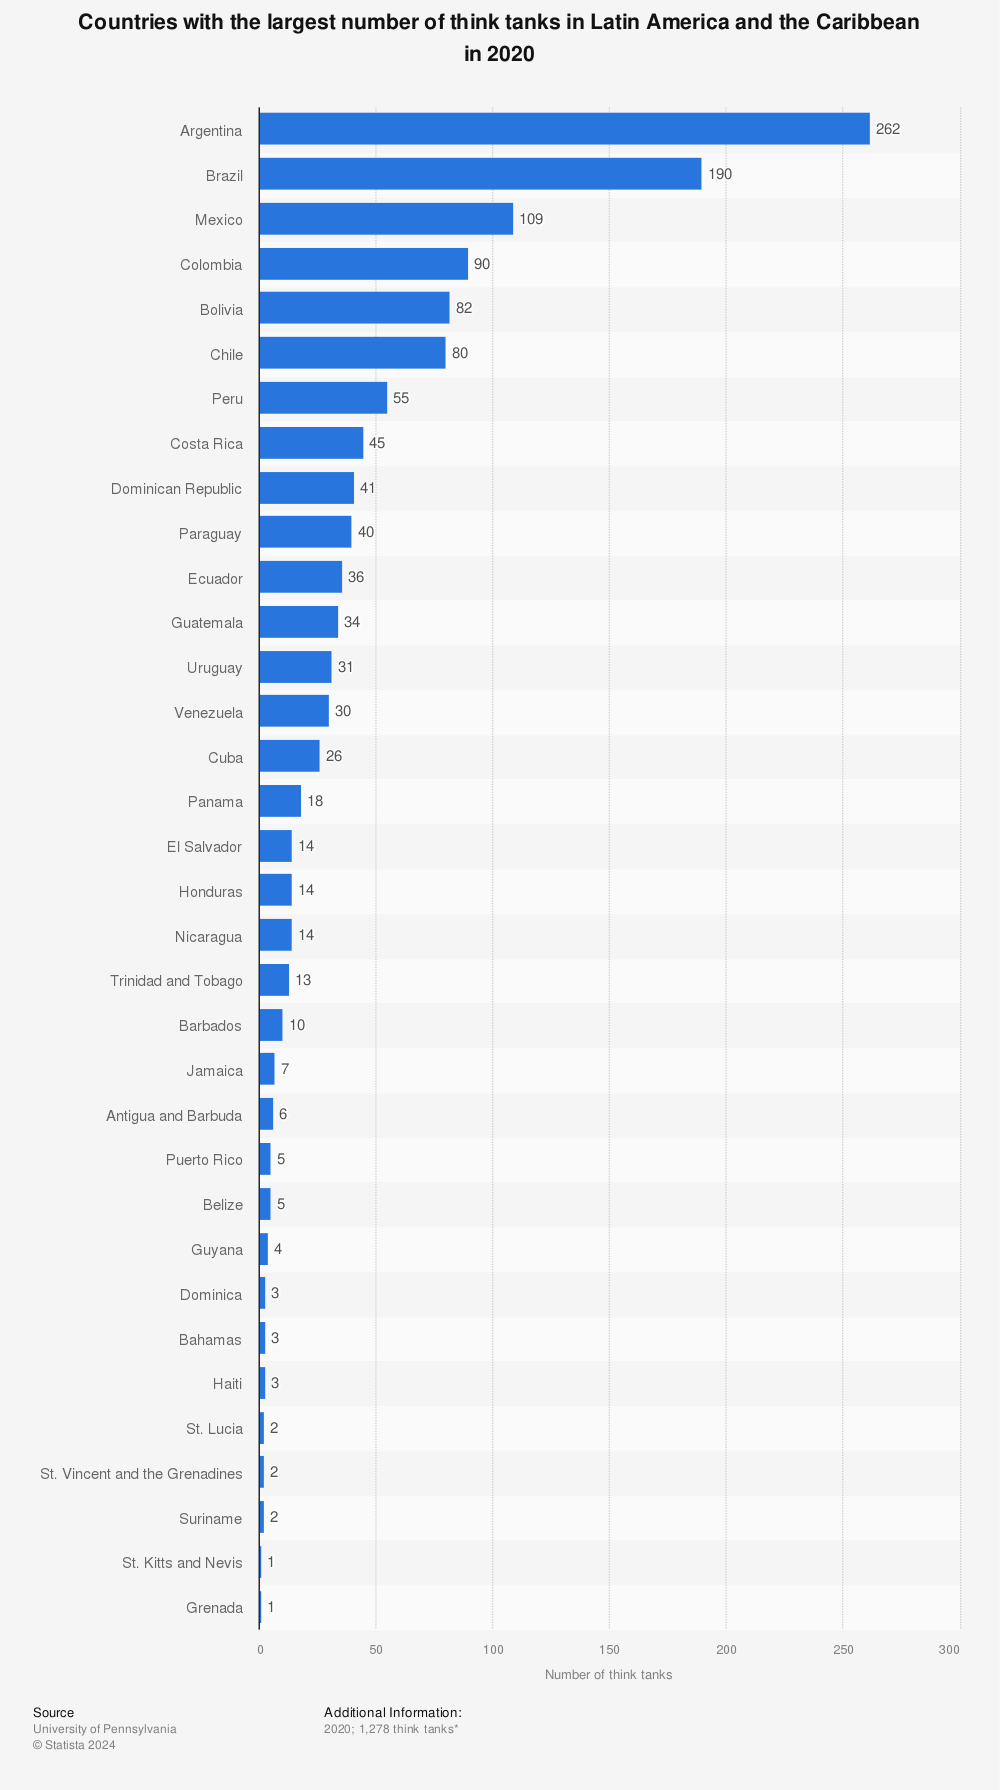 Statistic: Countries with the largest number of think tanks in Latin America and the Caribbean in 2020 | Statista